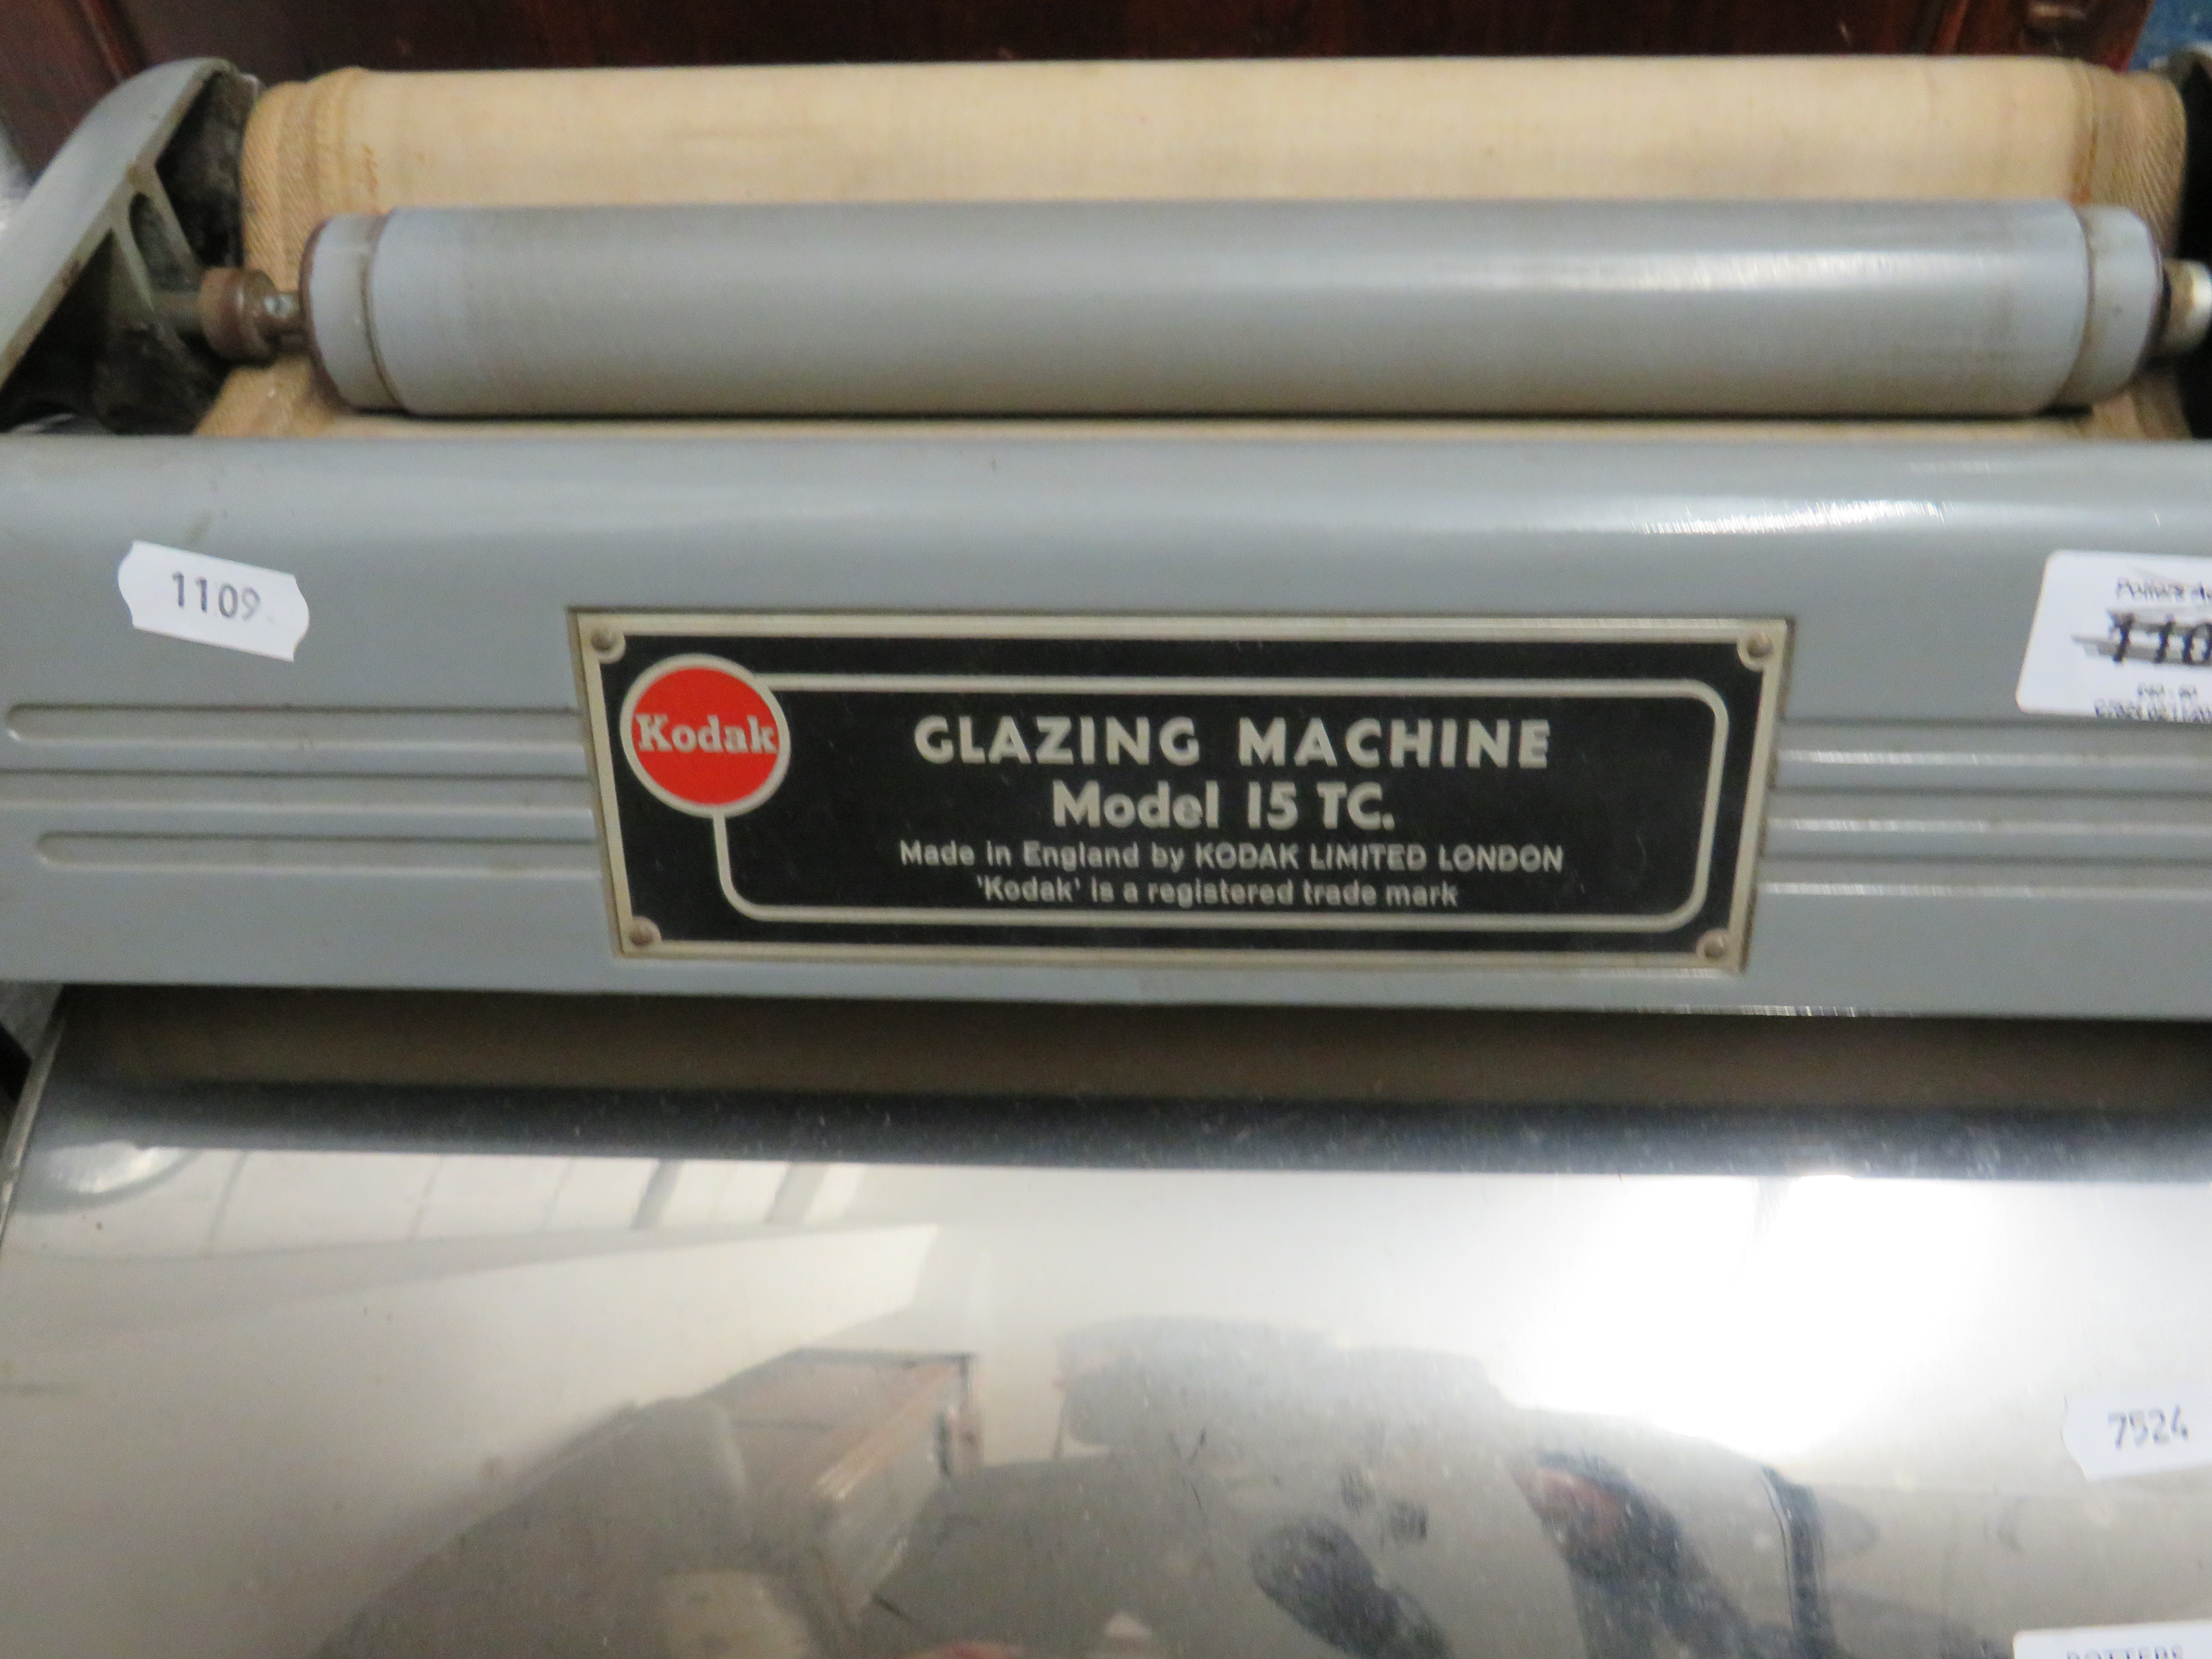 Kodak Limited Glazing Machine Model 15, manufactured in the 1950s, which was used to dry and gloss p - Image 2 of 4